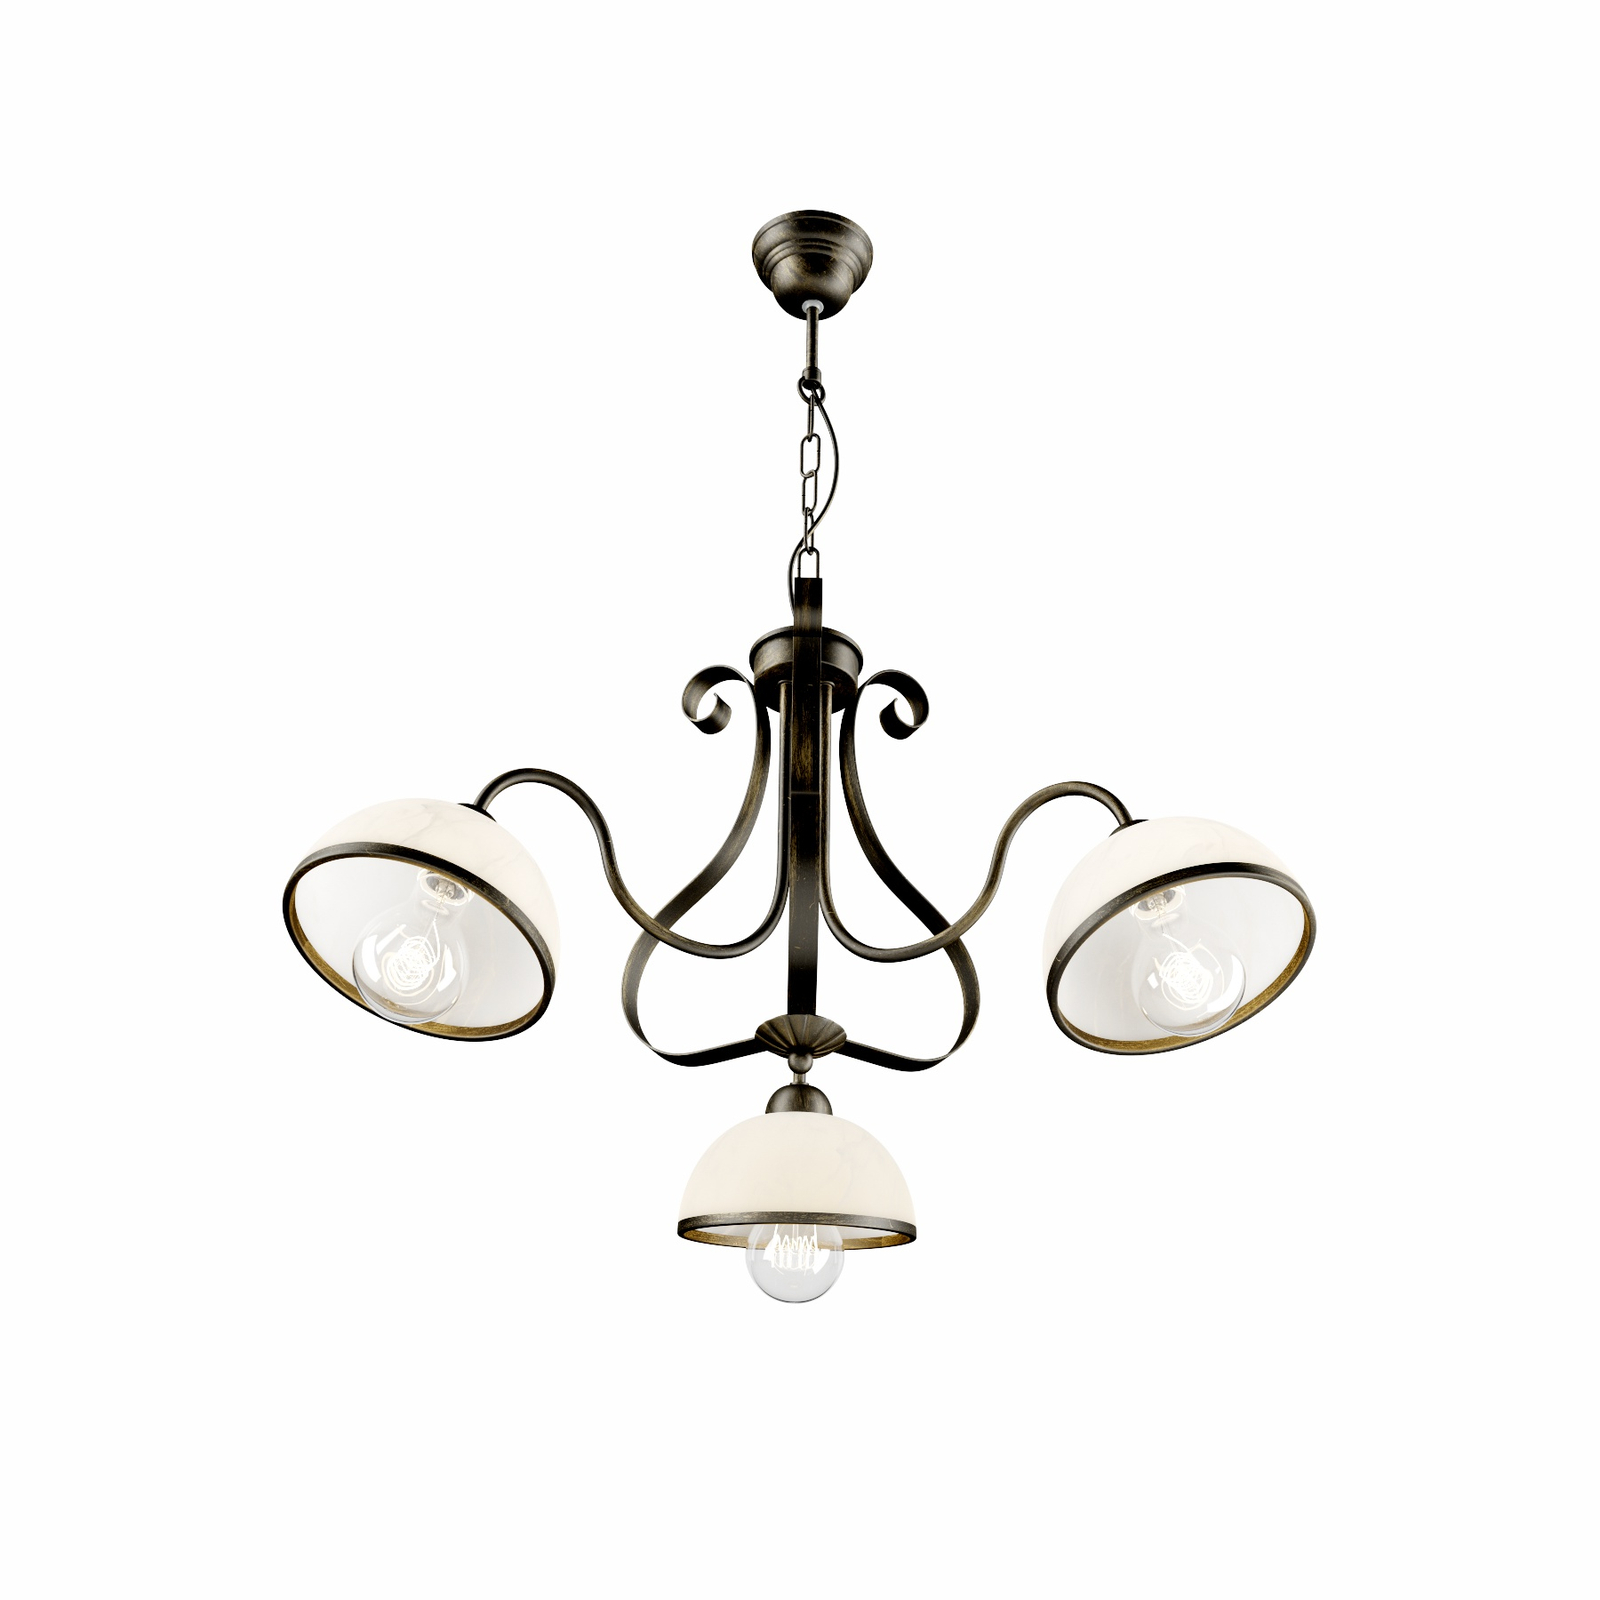 Antica pendant light in country house style, 3-bulb